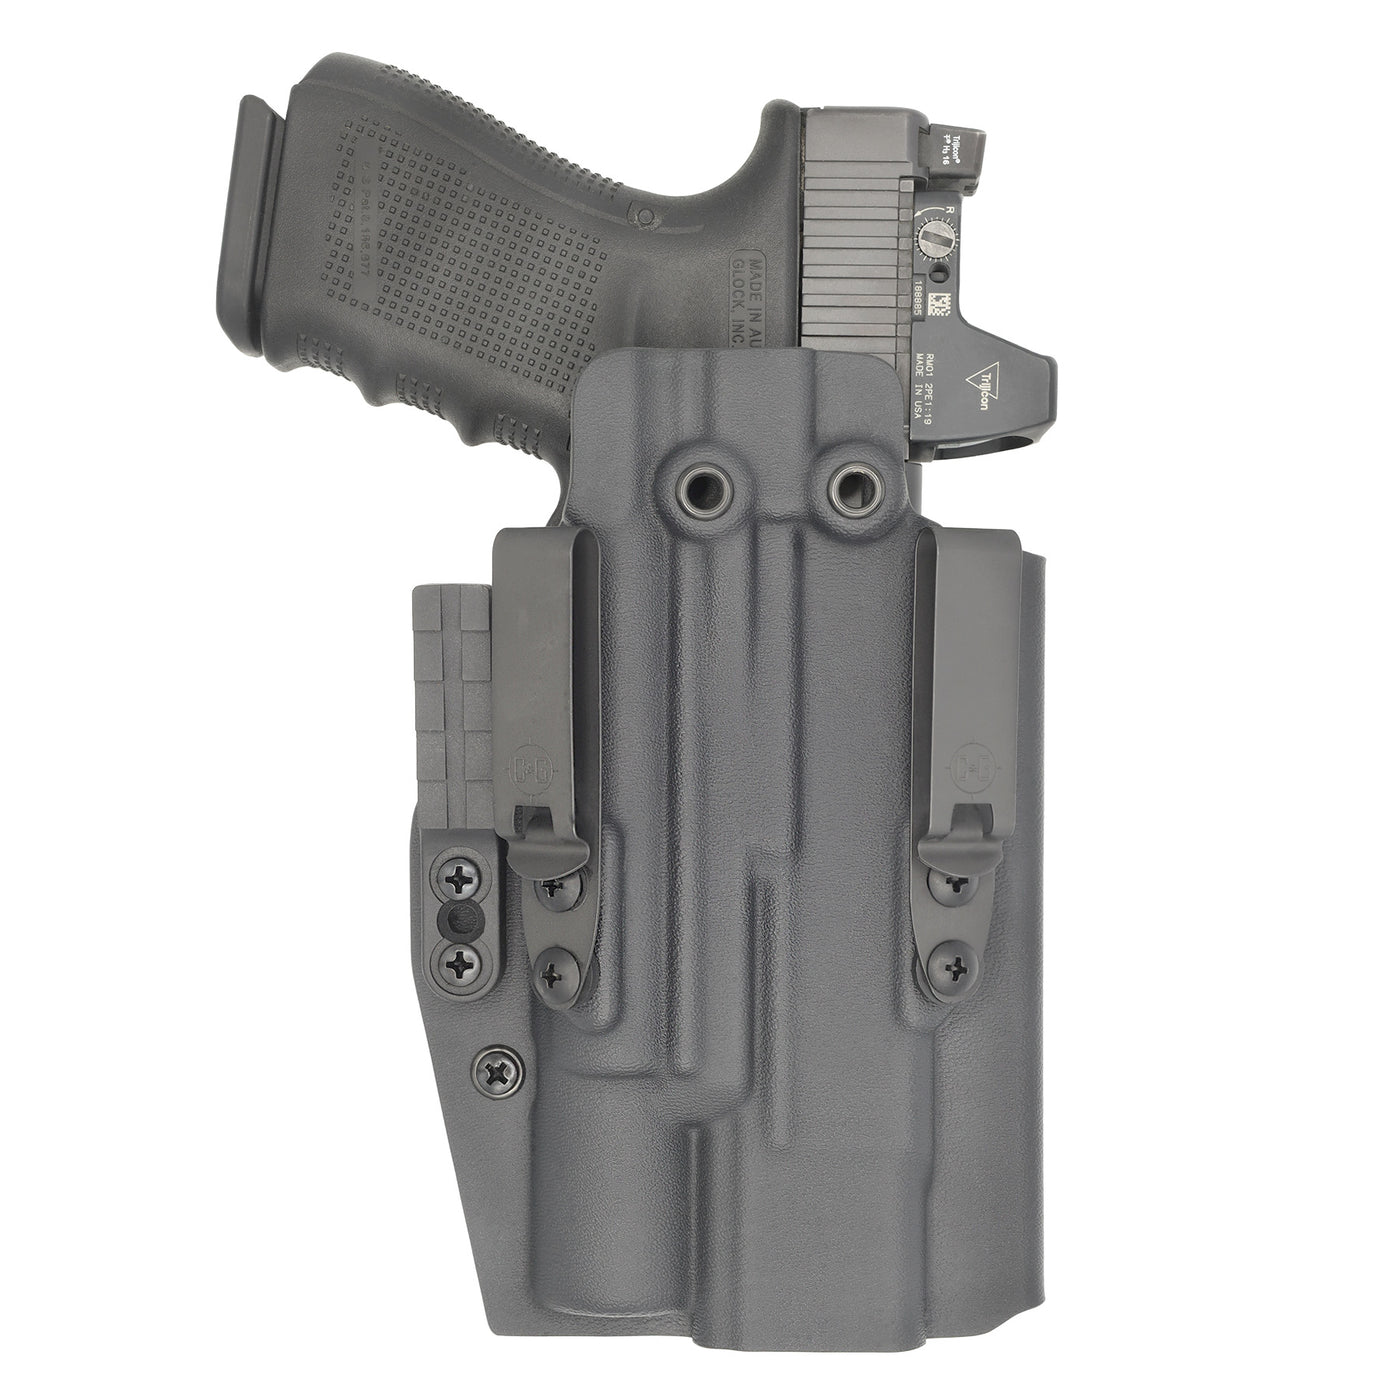 C&G Holsters Quickship IWB ALPHA UPGRADE Tactical CZ P10 Surefire X300 in holstered position